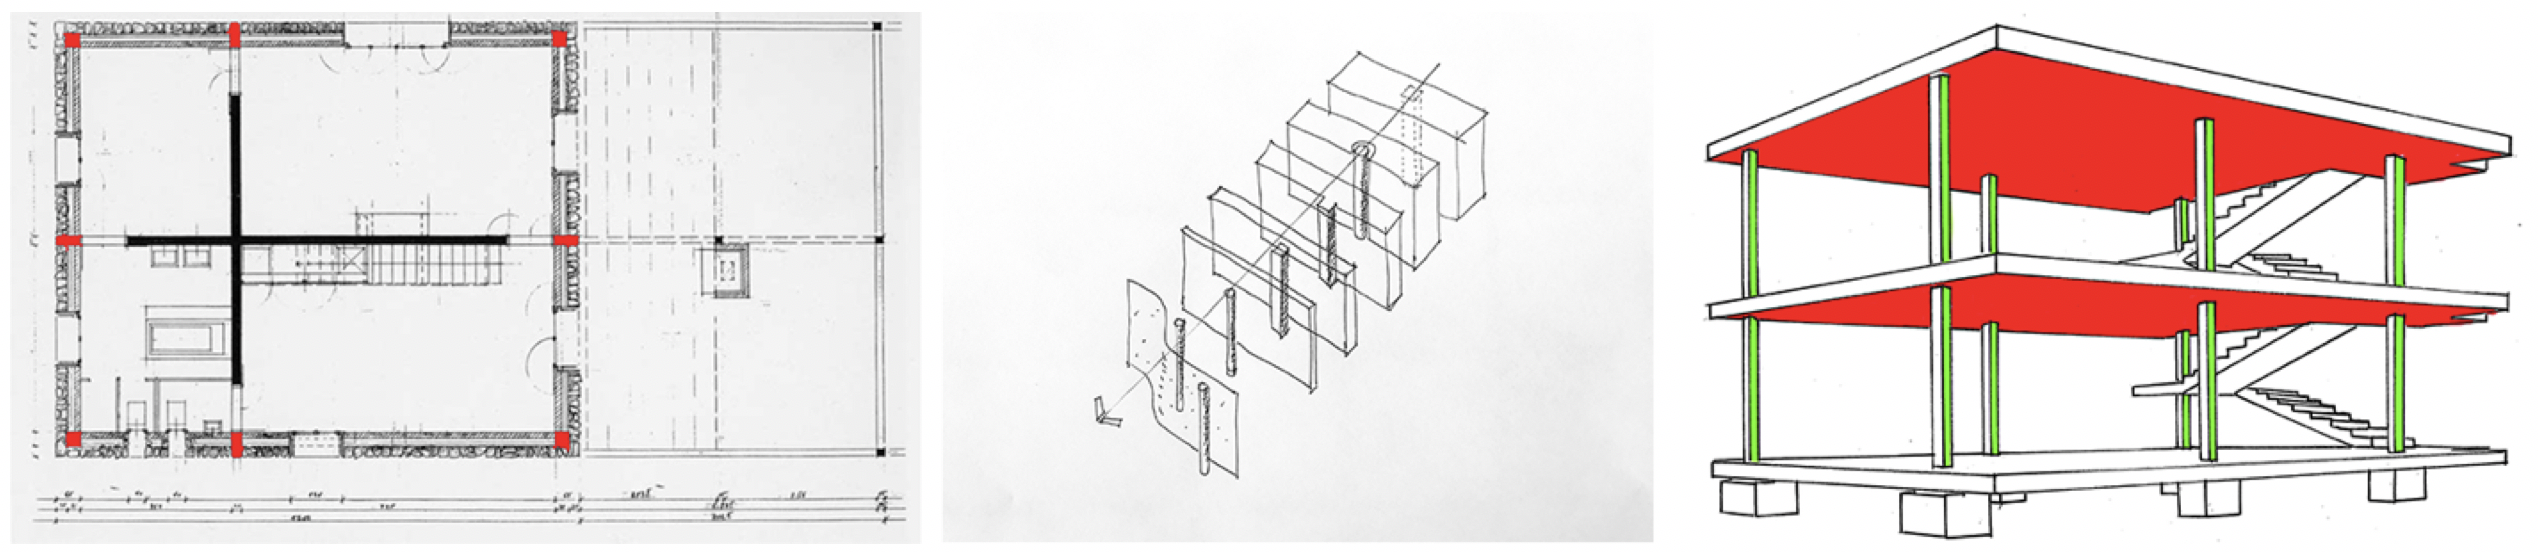 Structural diagram showing 1. the Tavole House by Herzog et de Meuron 2. author's diagram of the evolution of the wall and column 3. domino axonometric